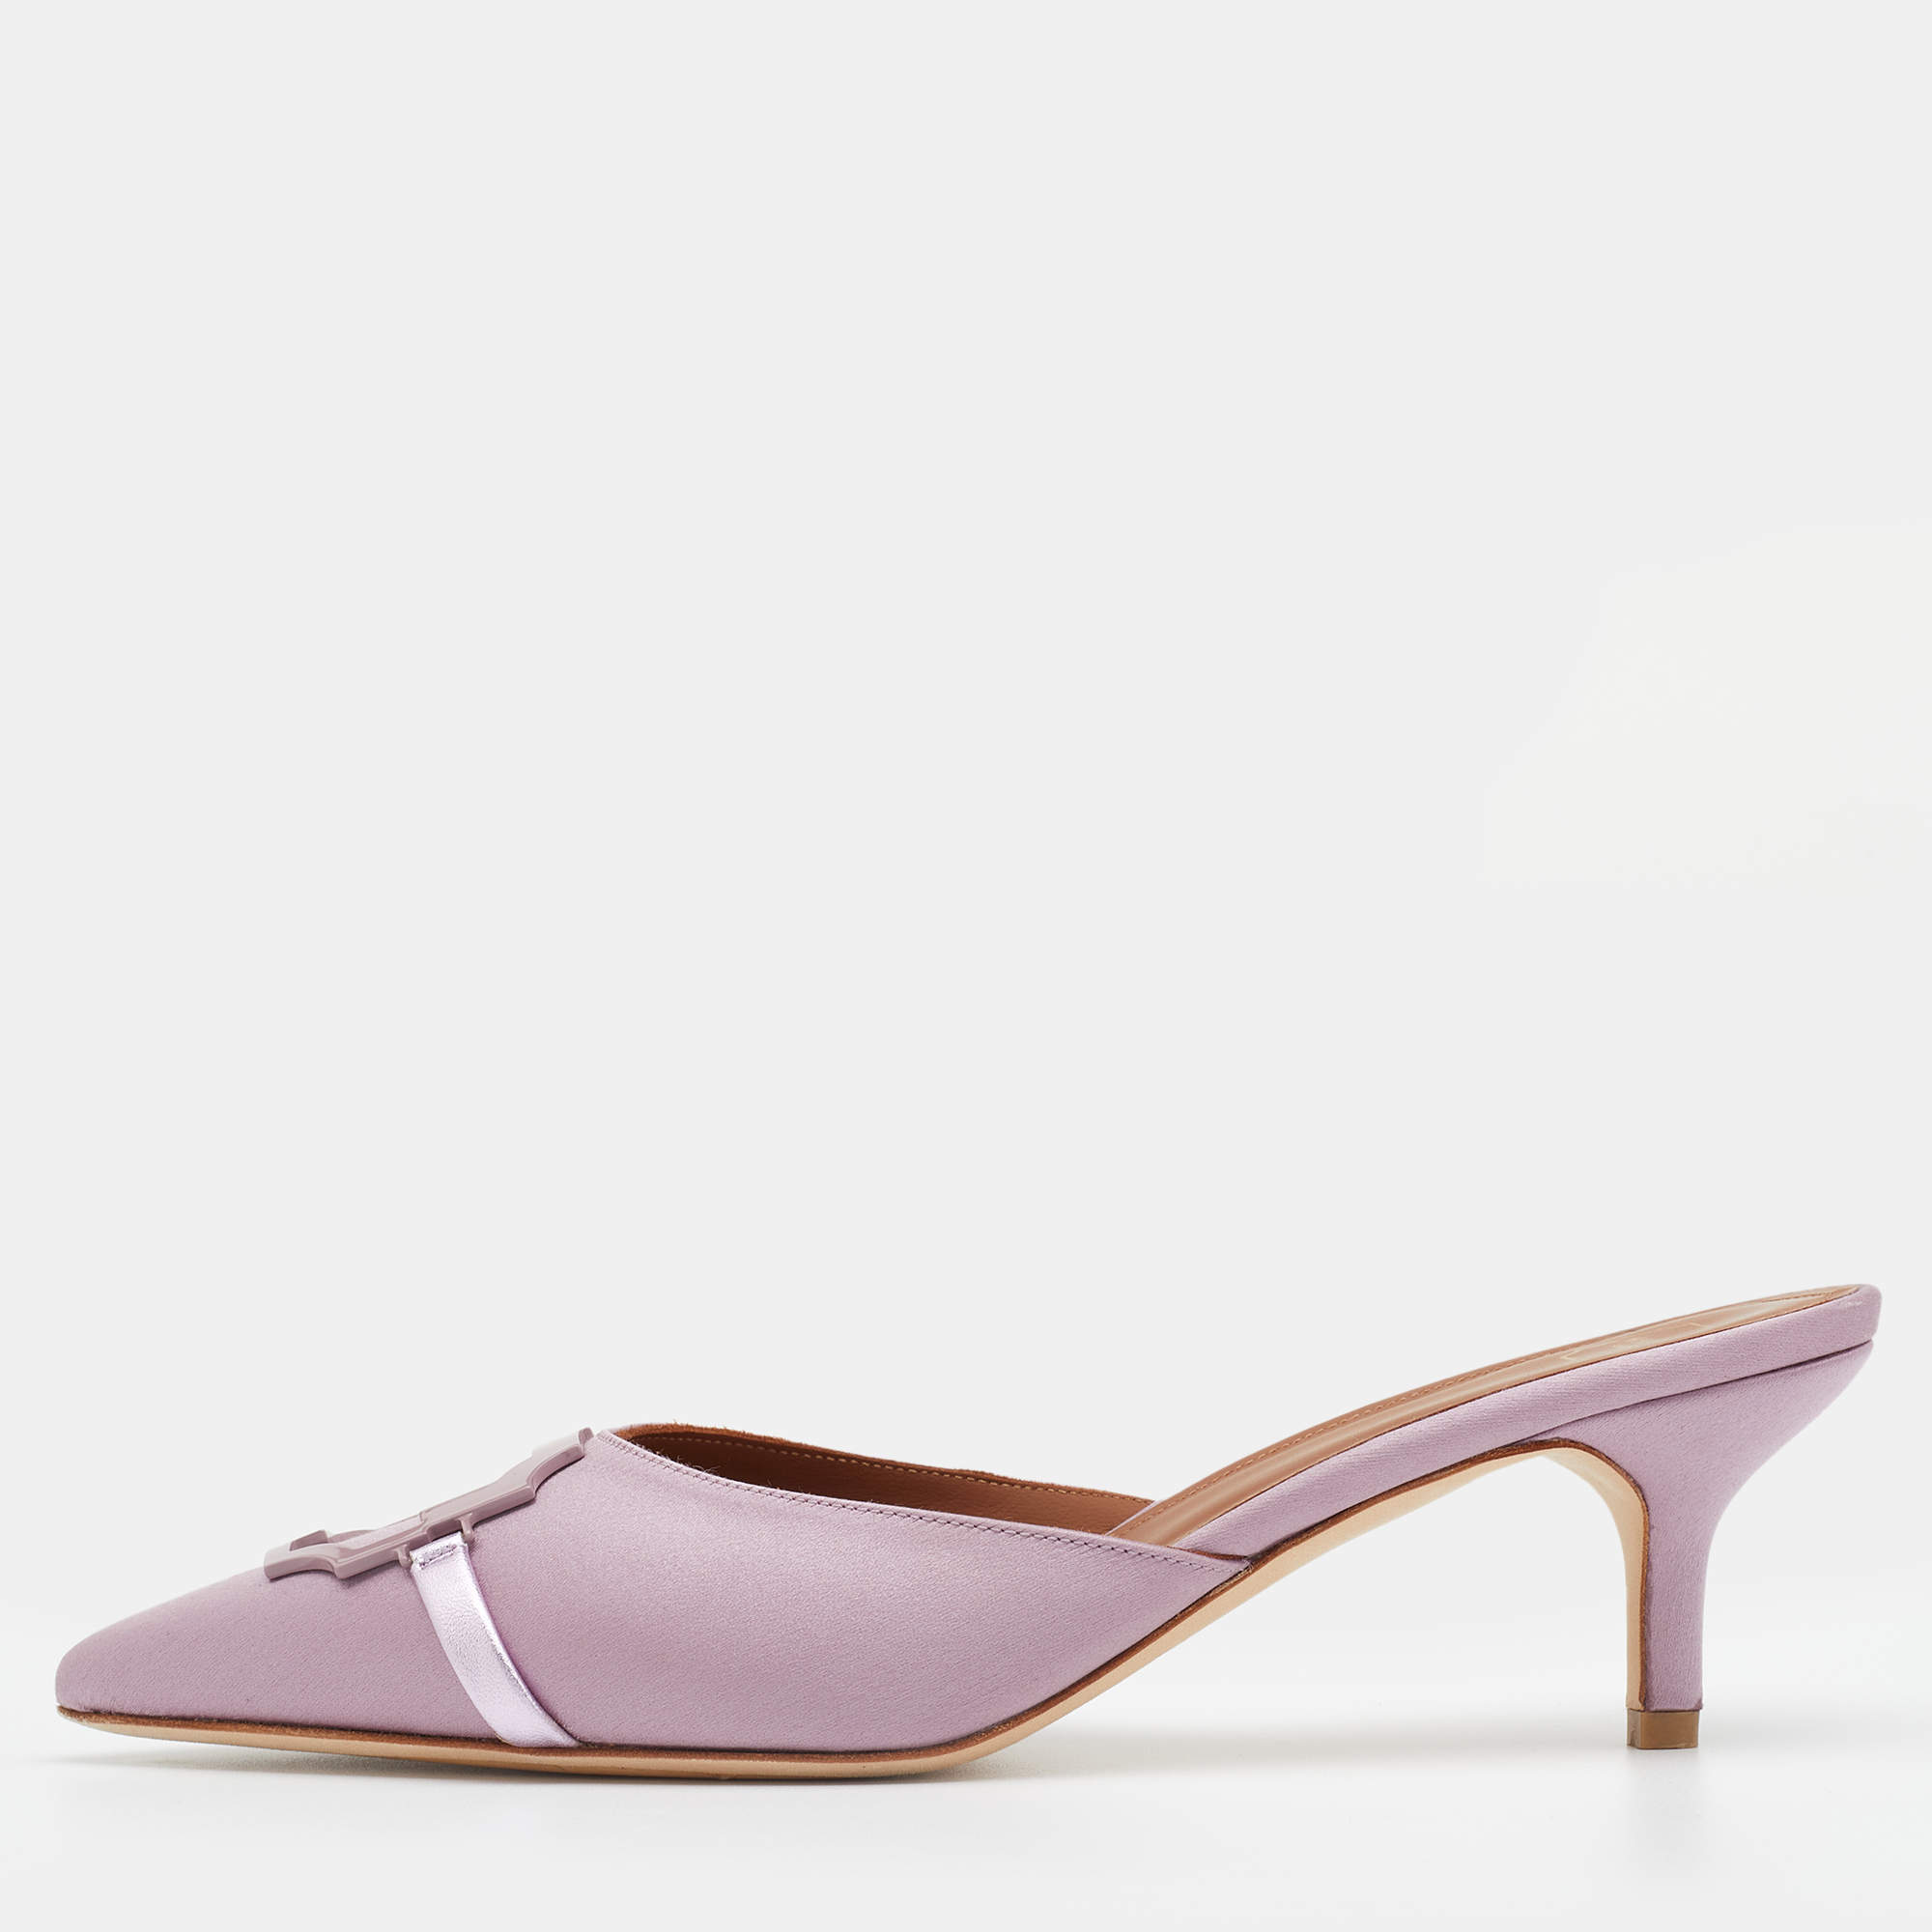 Malone Souliers Lilac Satin Pointed Toe Mules Size 39